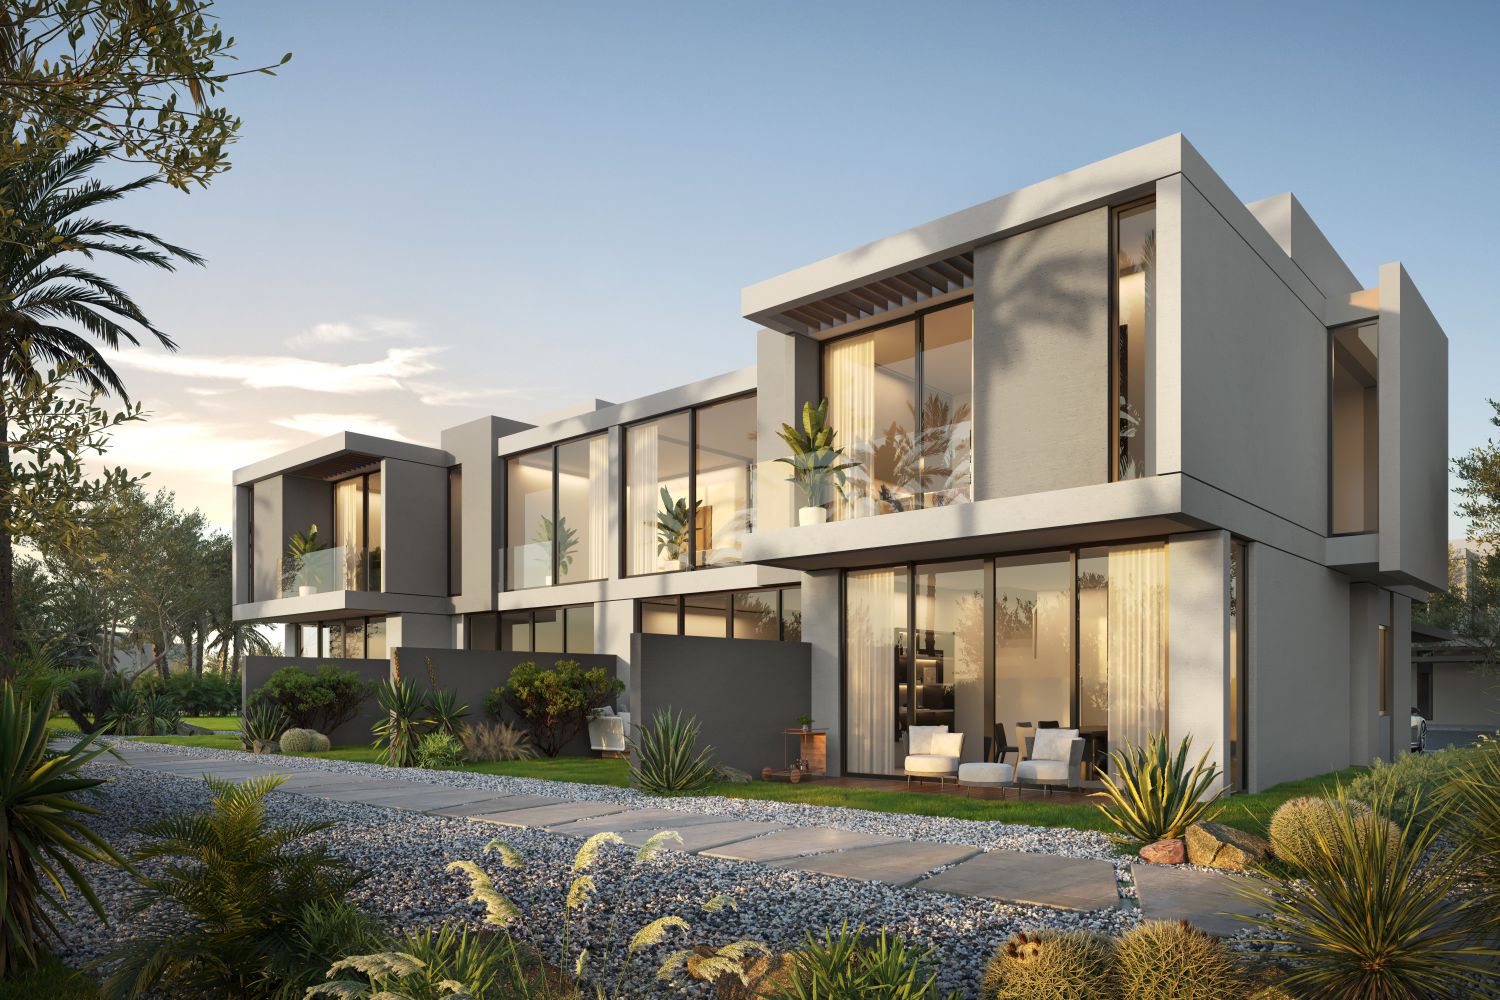 Live luxuriously in Ocena at Pardis Villas